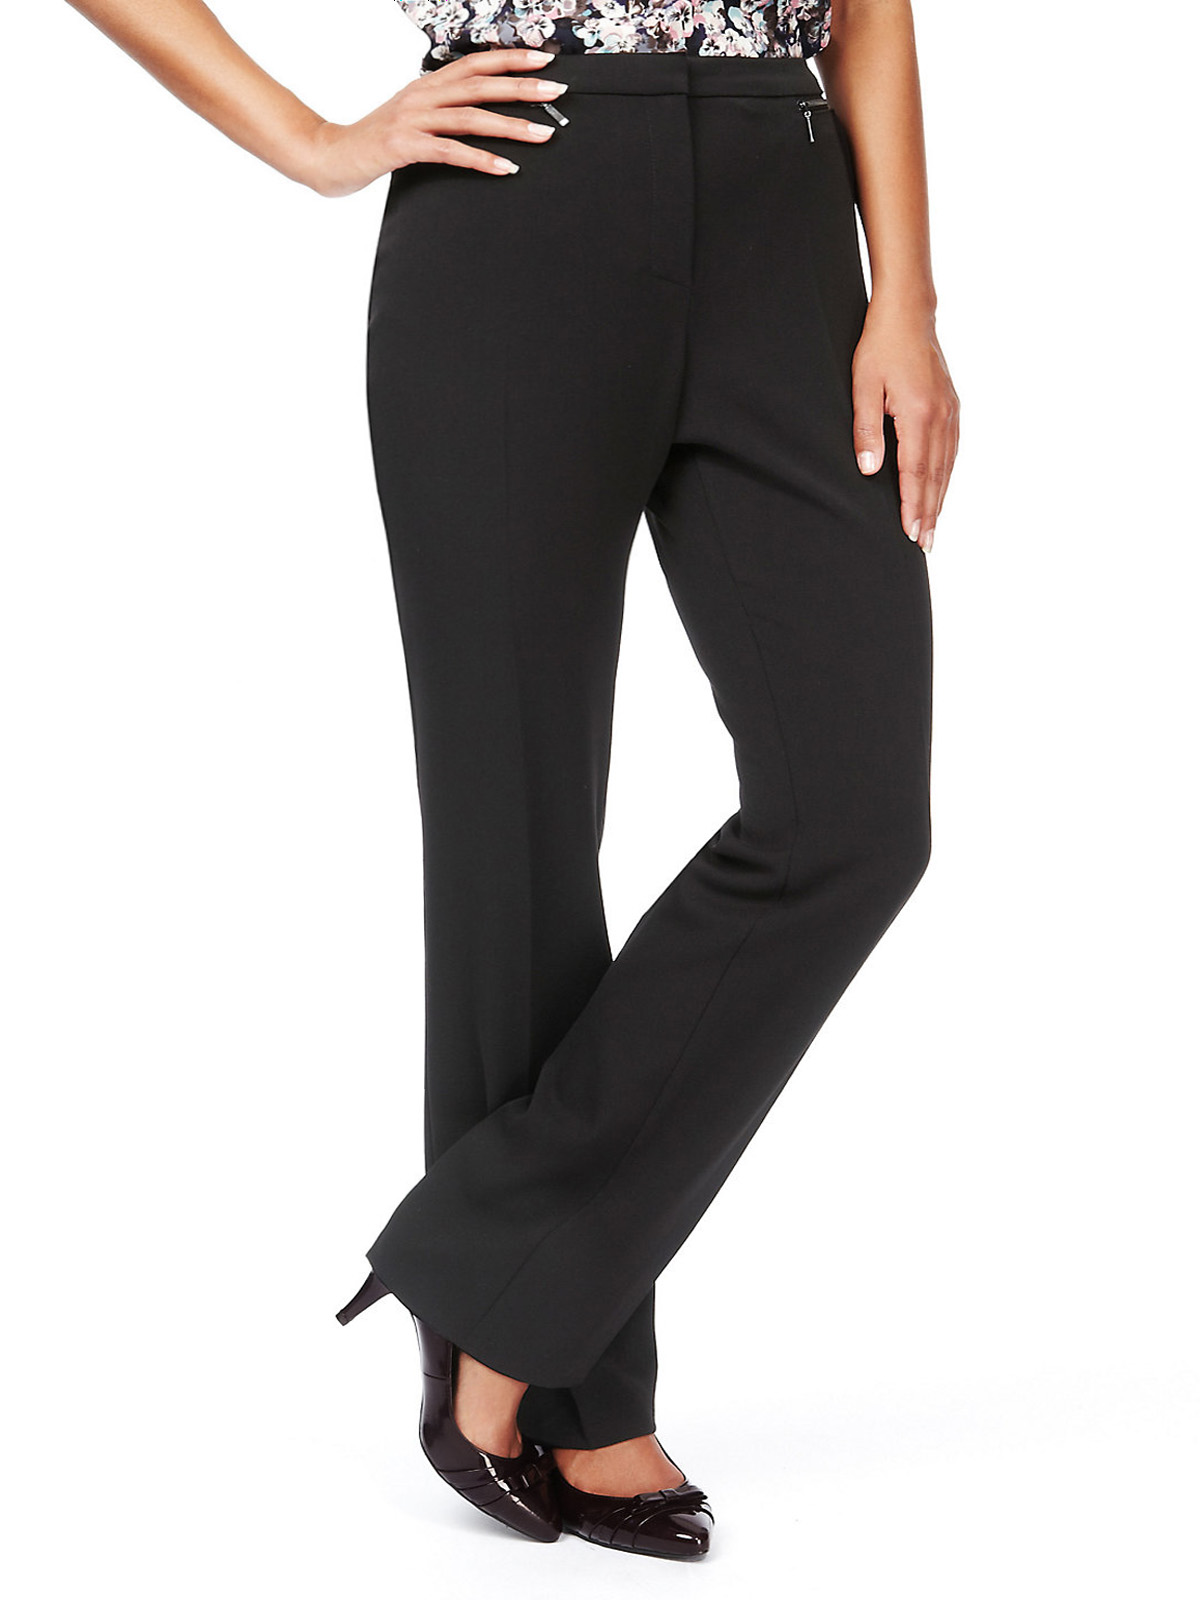 Marks and Spencer - - M&5 BLACK 2-Way Stretch Straight Leg Zip Pockets ...